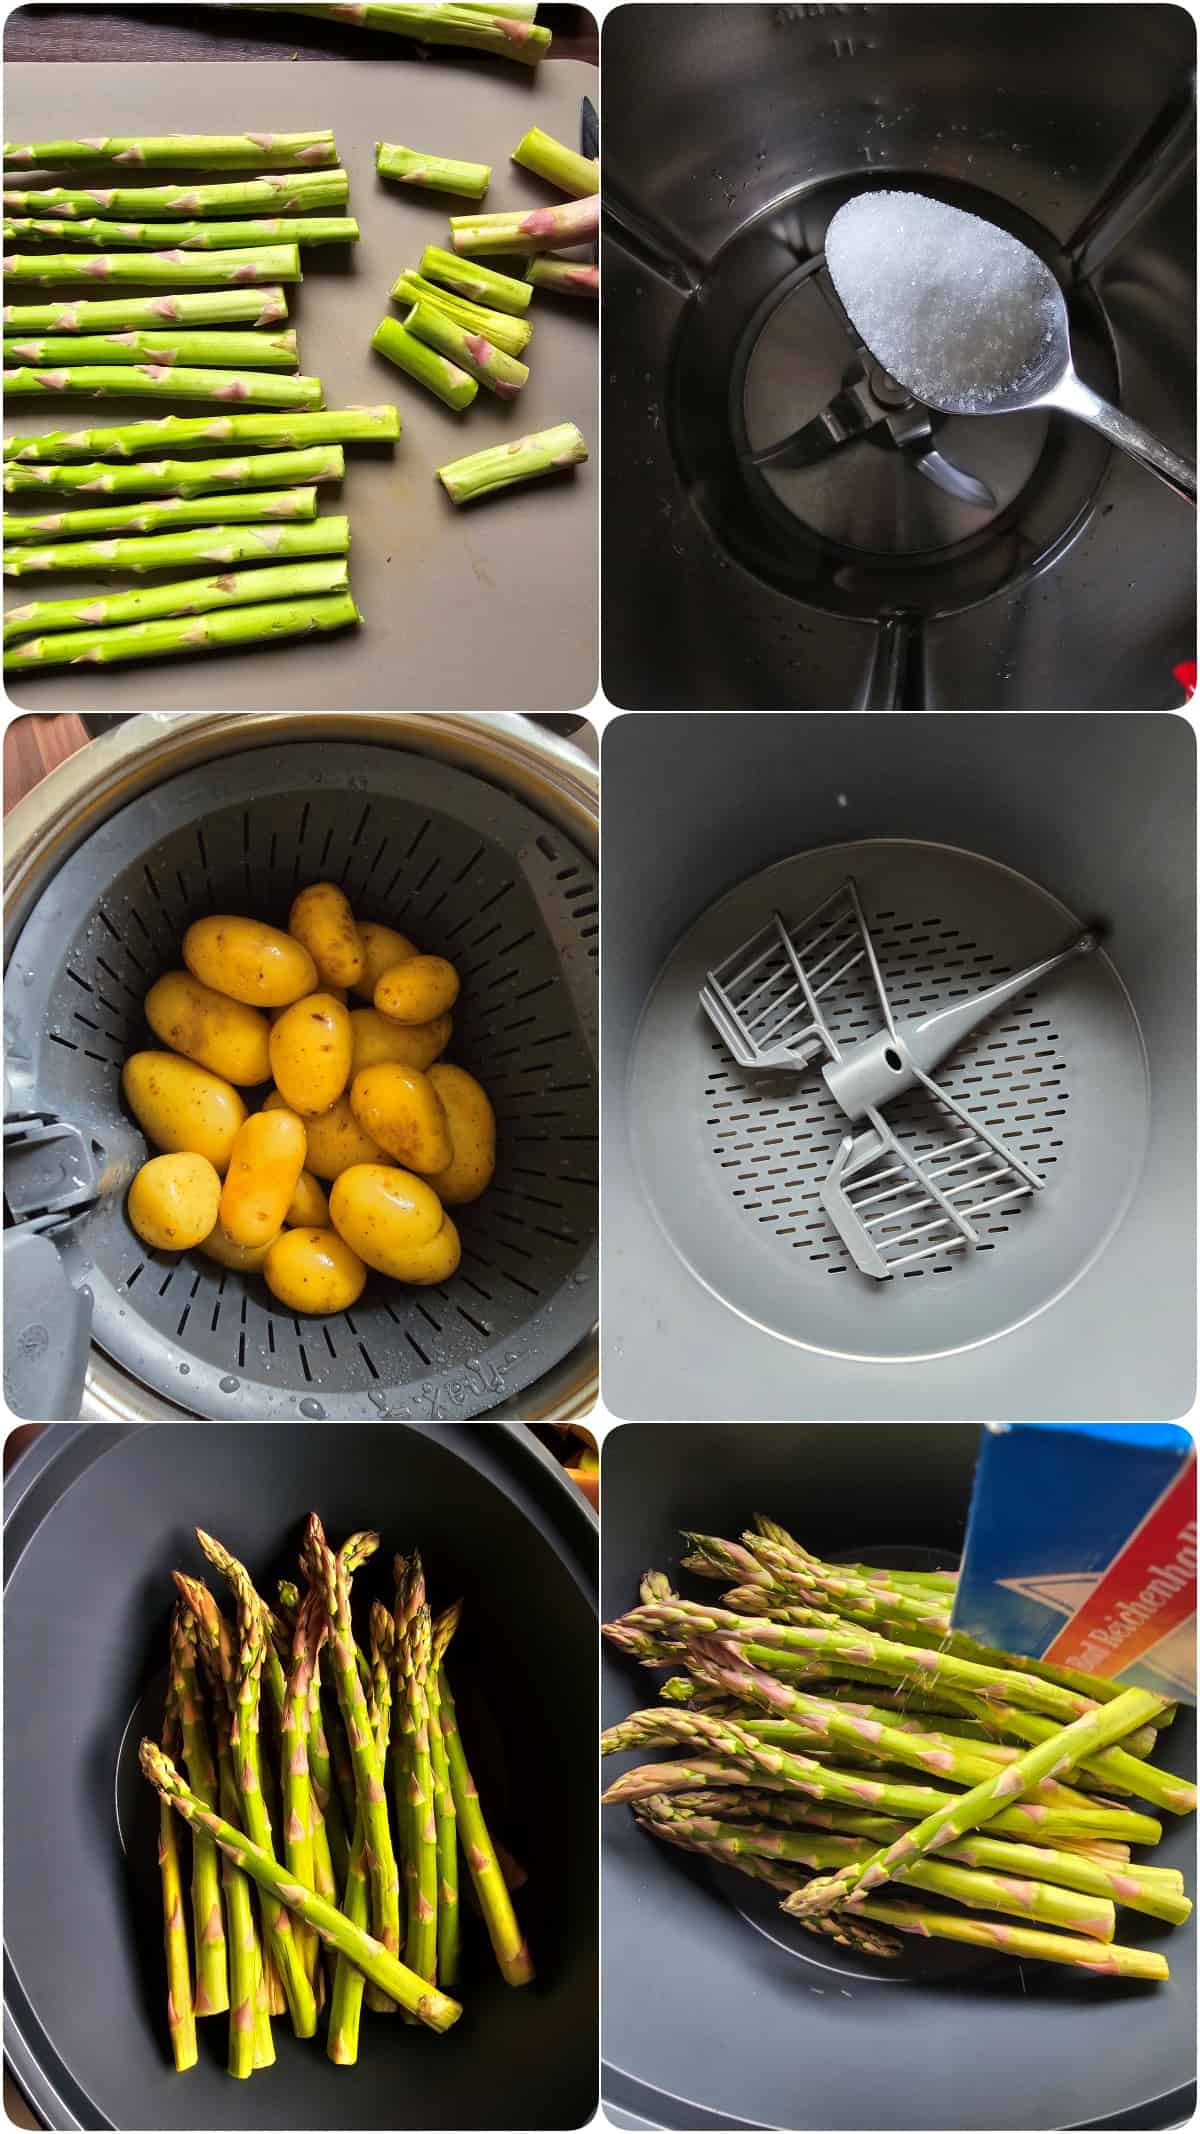 A collage of the preparation steps for green asparagus with hollandaise sauce.